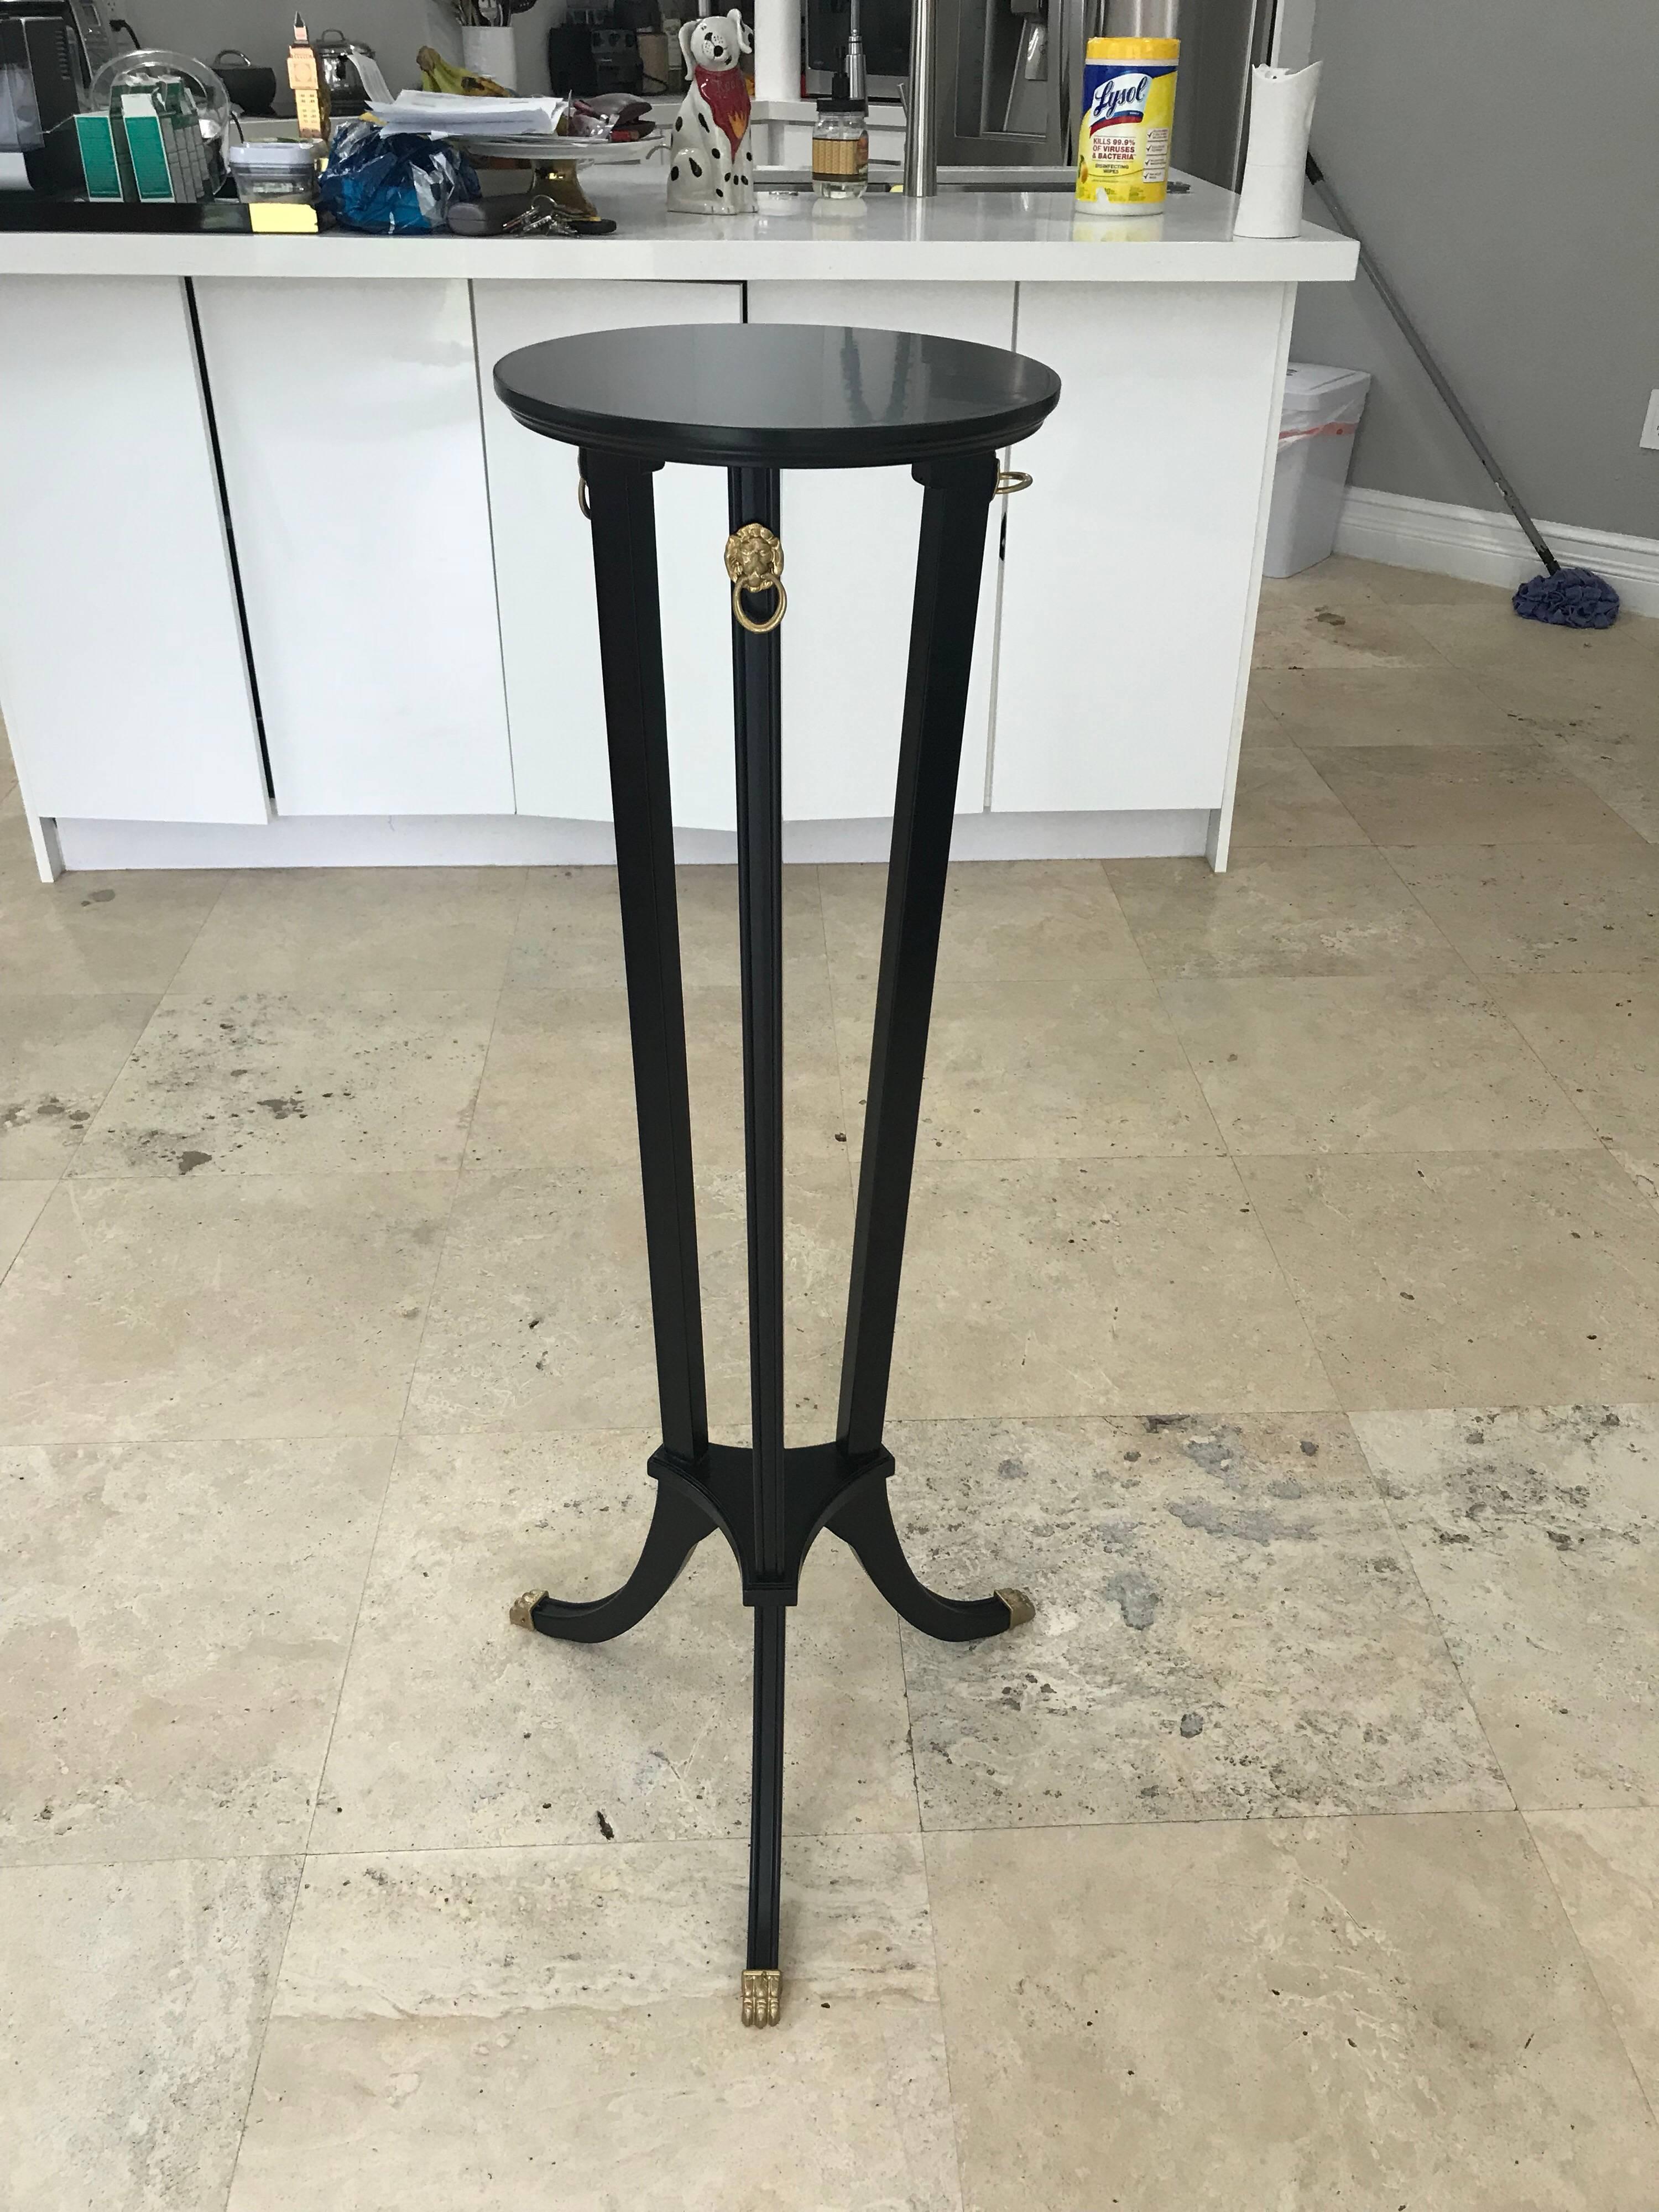 Beautiful French Empire style ebonized with bronze hardware pedestal, circa 1920s, very tall pedestal and very nice bronze detail with ebonized finish, the pedestal are in perfect condition, we travelled to buy all our pieces in France. We bought